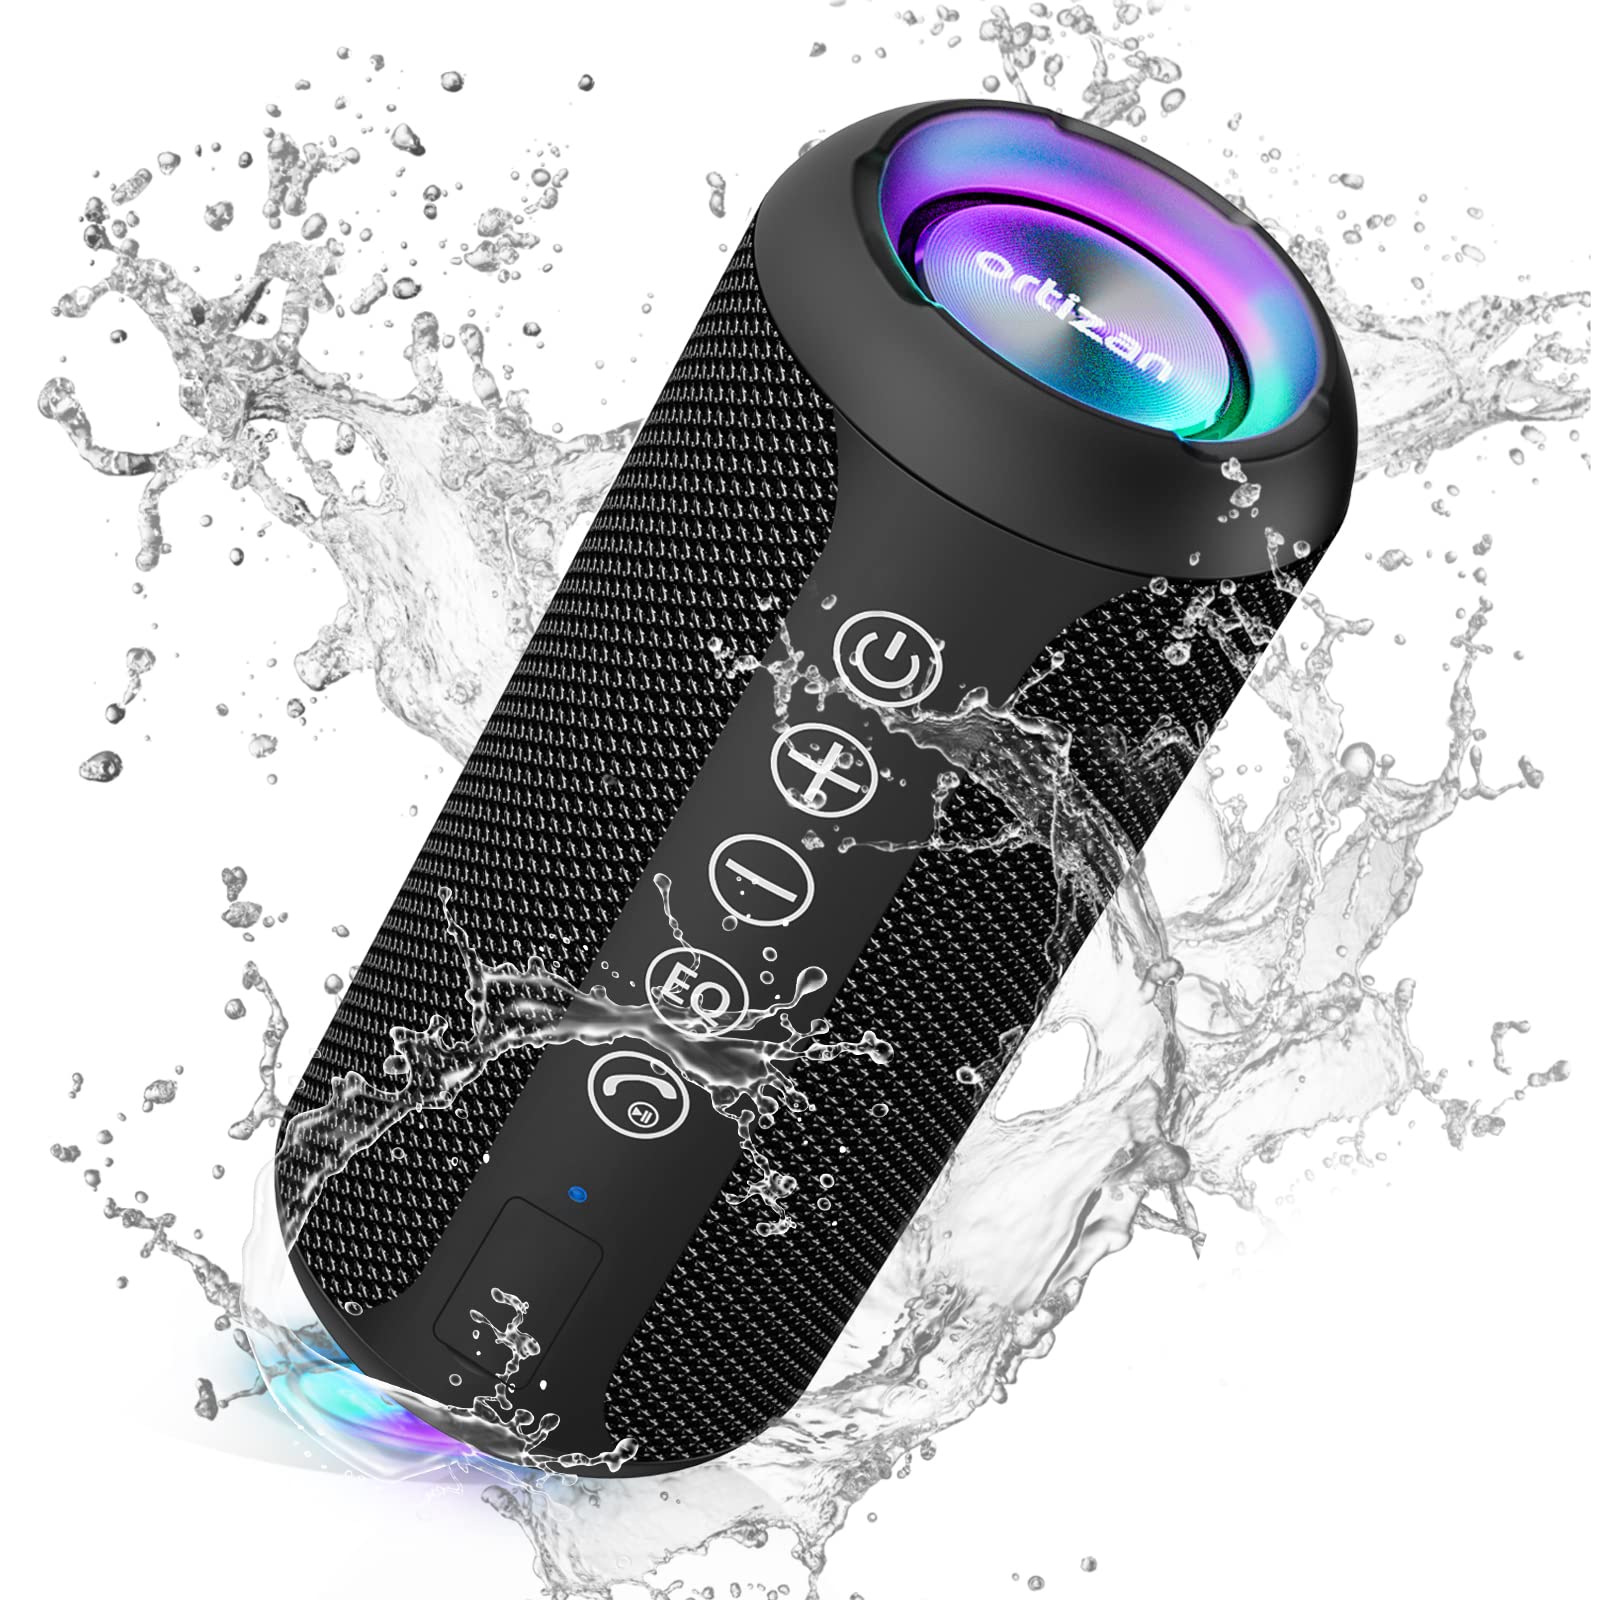 Ortizan Bluetooth Speaker, IPX7 Waterproof Portable Wireless Outdoor Speakers with LED Light, 24W Stereo Sound and 30H Playtime, 20 Meter Bluetooth Range, Mini Speakers, TF Card and AUX